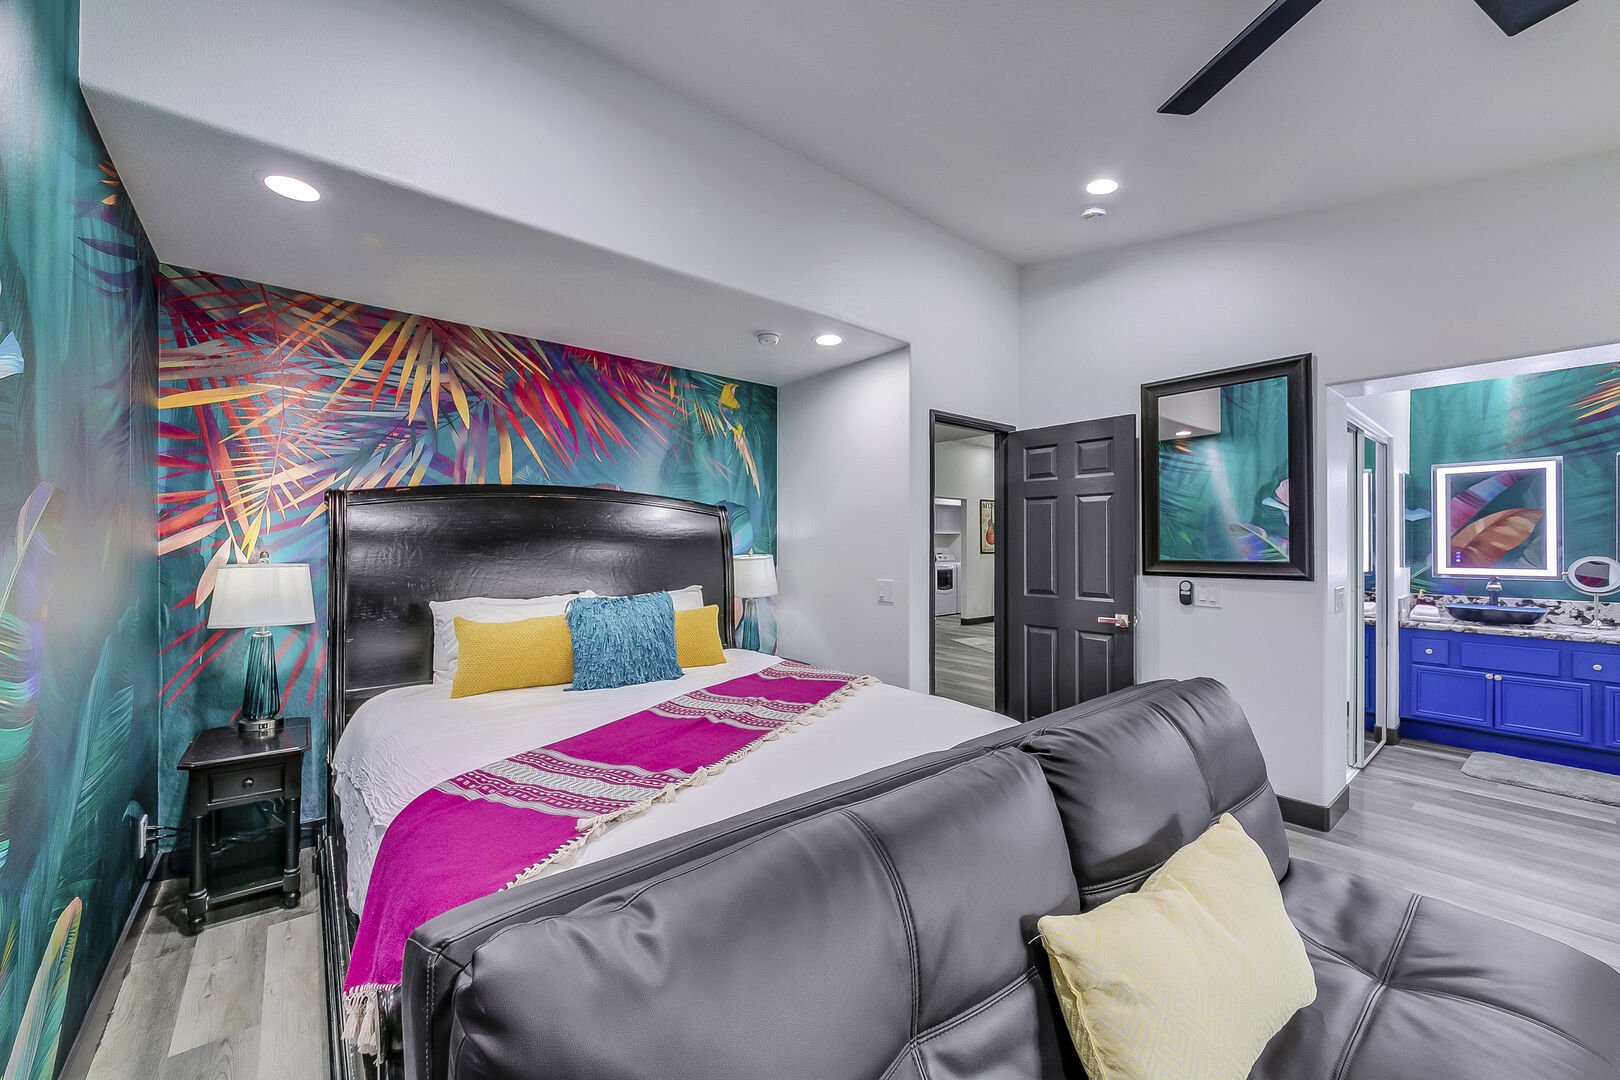 Master Suite 1 is located next to Casita Suite 3 features a Cal-King sized bed, 50-inch Roku television, remote-controlled ceiling fan, and private access to the back patio through the sliding glass door.